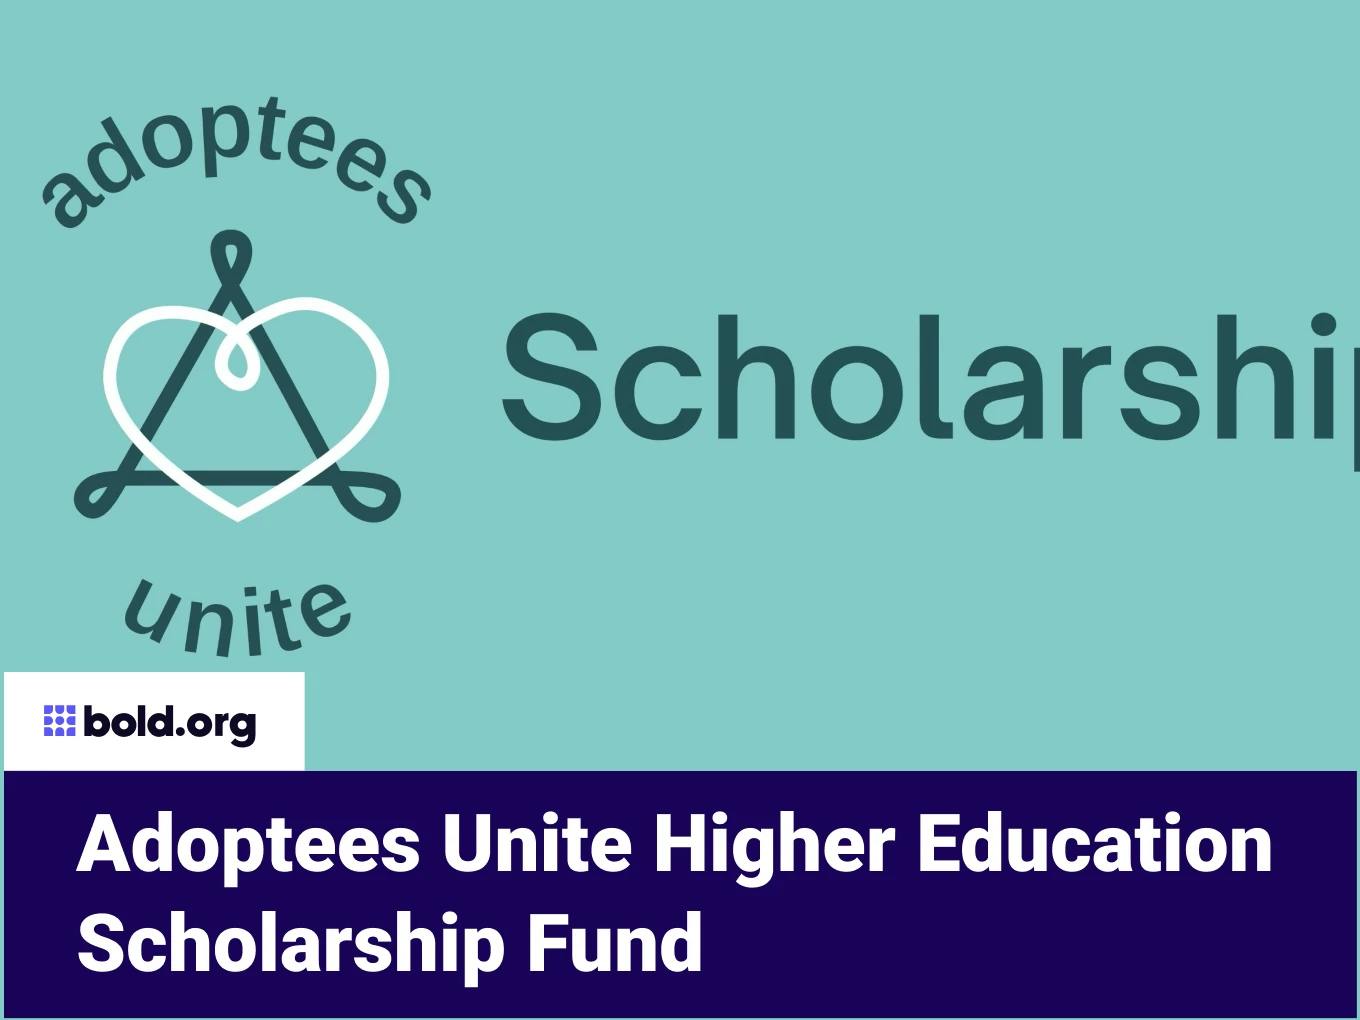 Adoptees Unite Higher Education Scholarship Fund